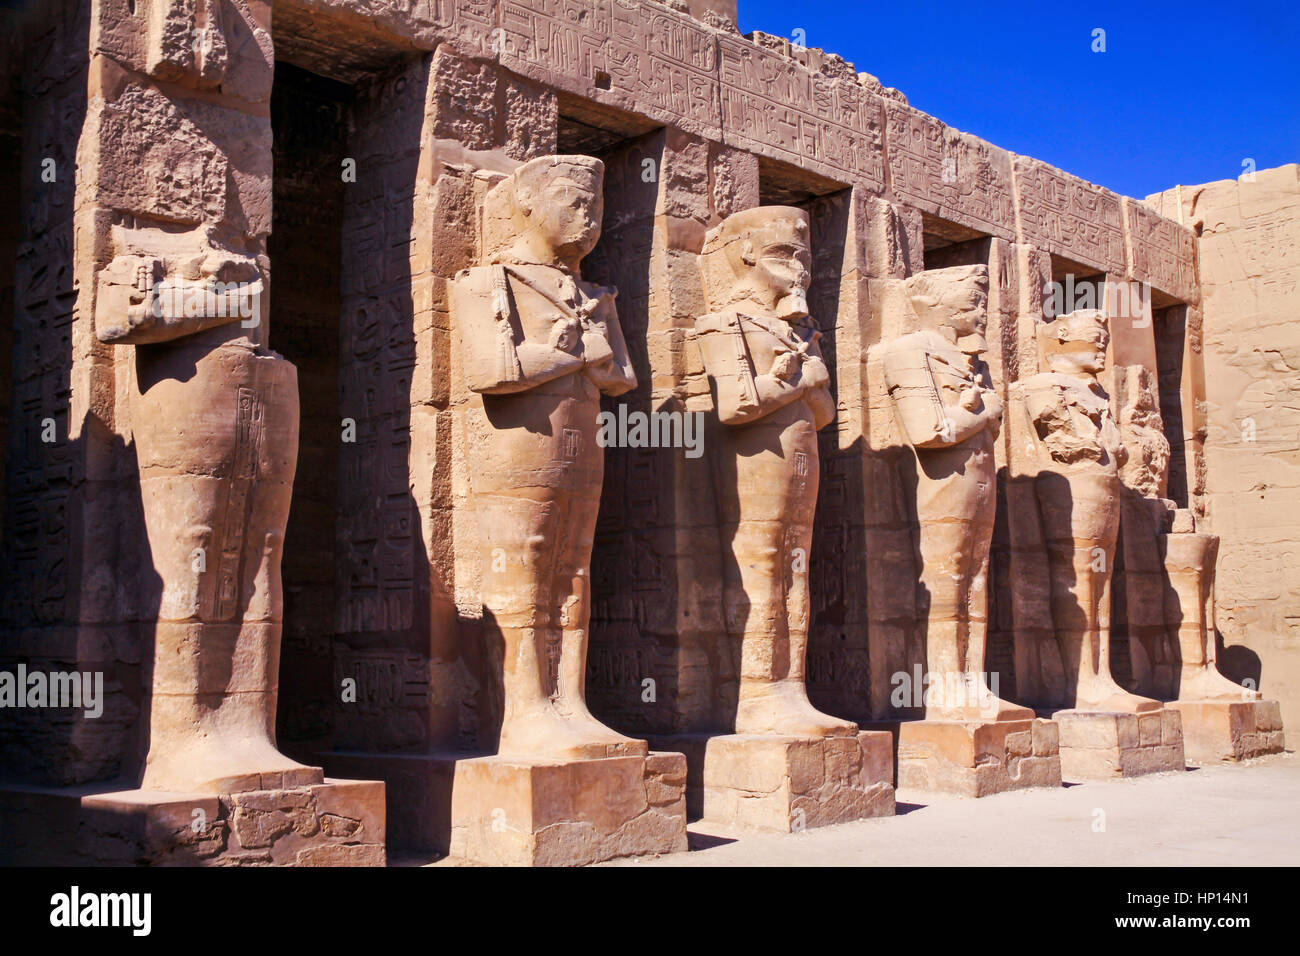 Ancient Egyptian Civilization Standing Statues in Karnak Temple Courtyard near Luxor Egypt Stock Photo